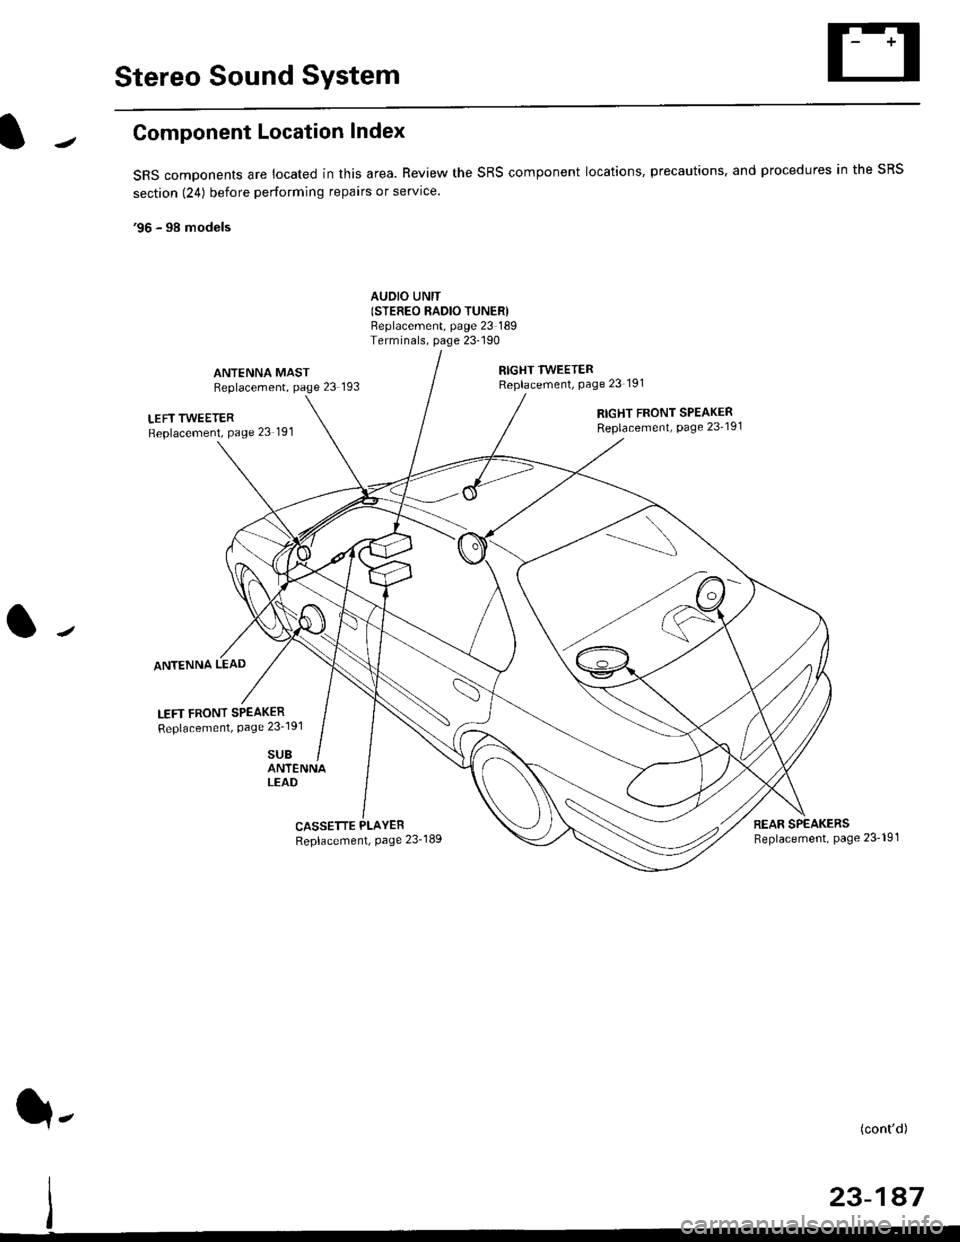 HONDA CIVIC 1997 6.G Workshop Manual Stereo Sound System
Component Location Index
SRS components are located in this area. Review the SRS component locations, precautions. and procedures in the SRS
section (24) before performing repairs 